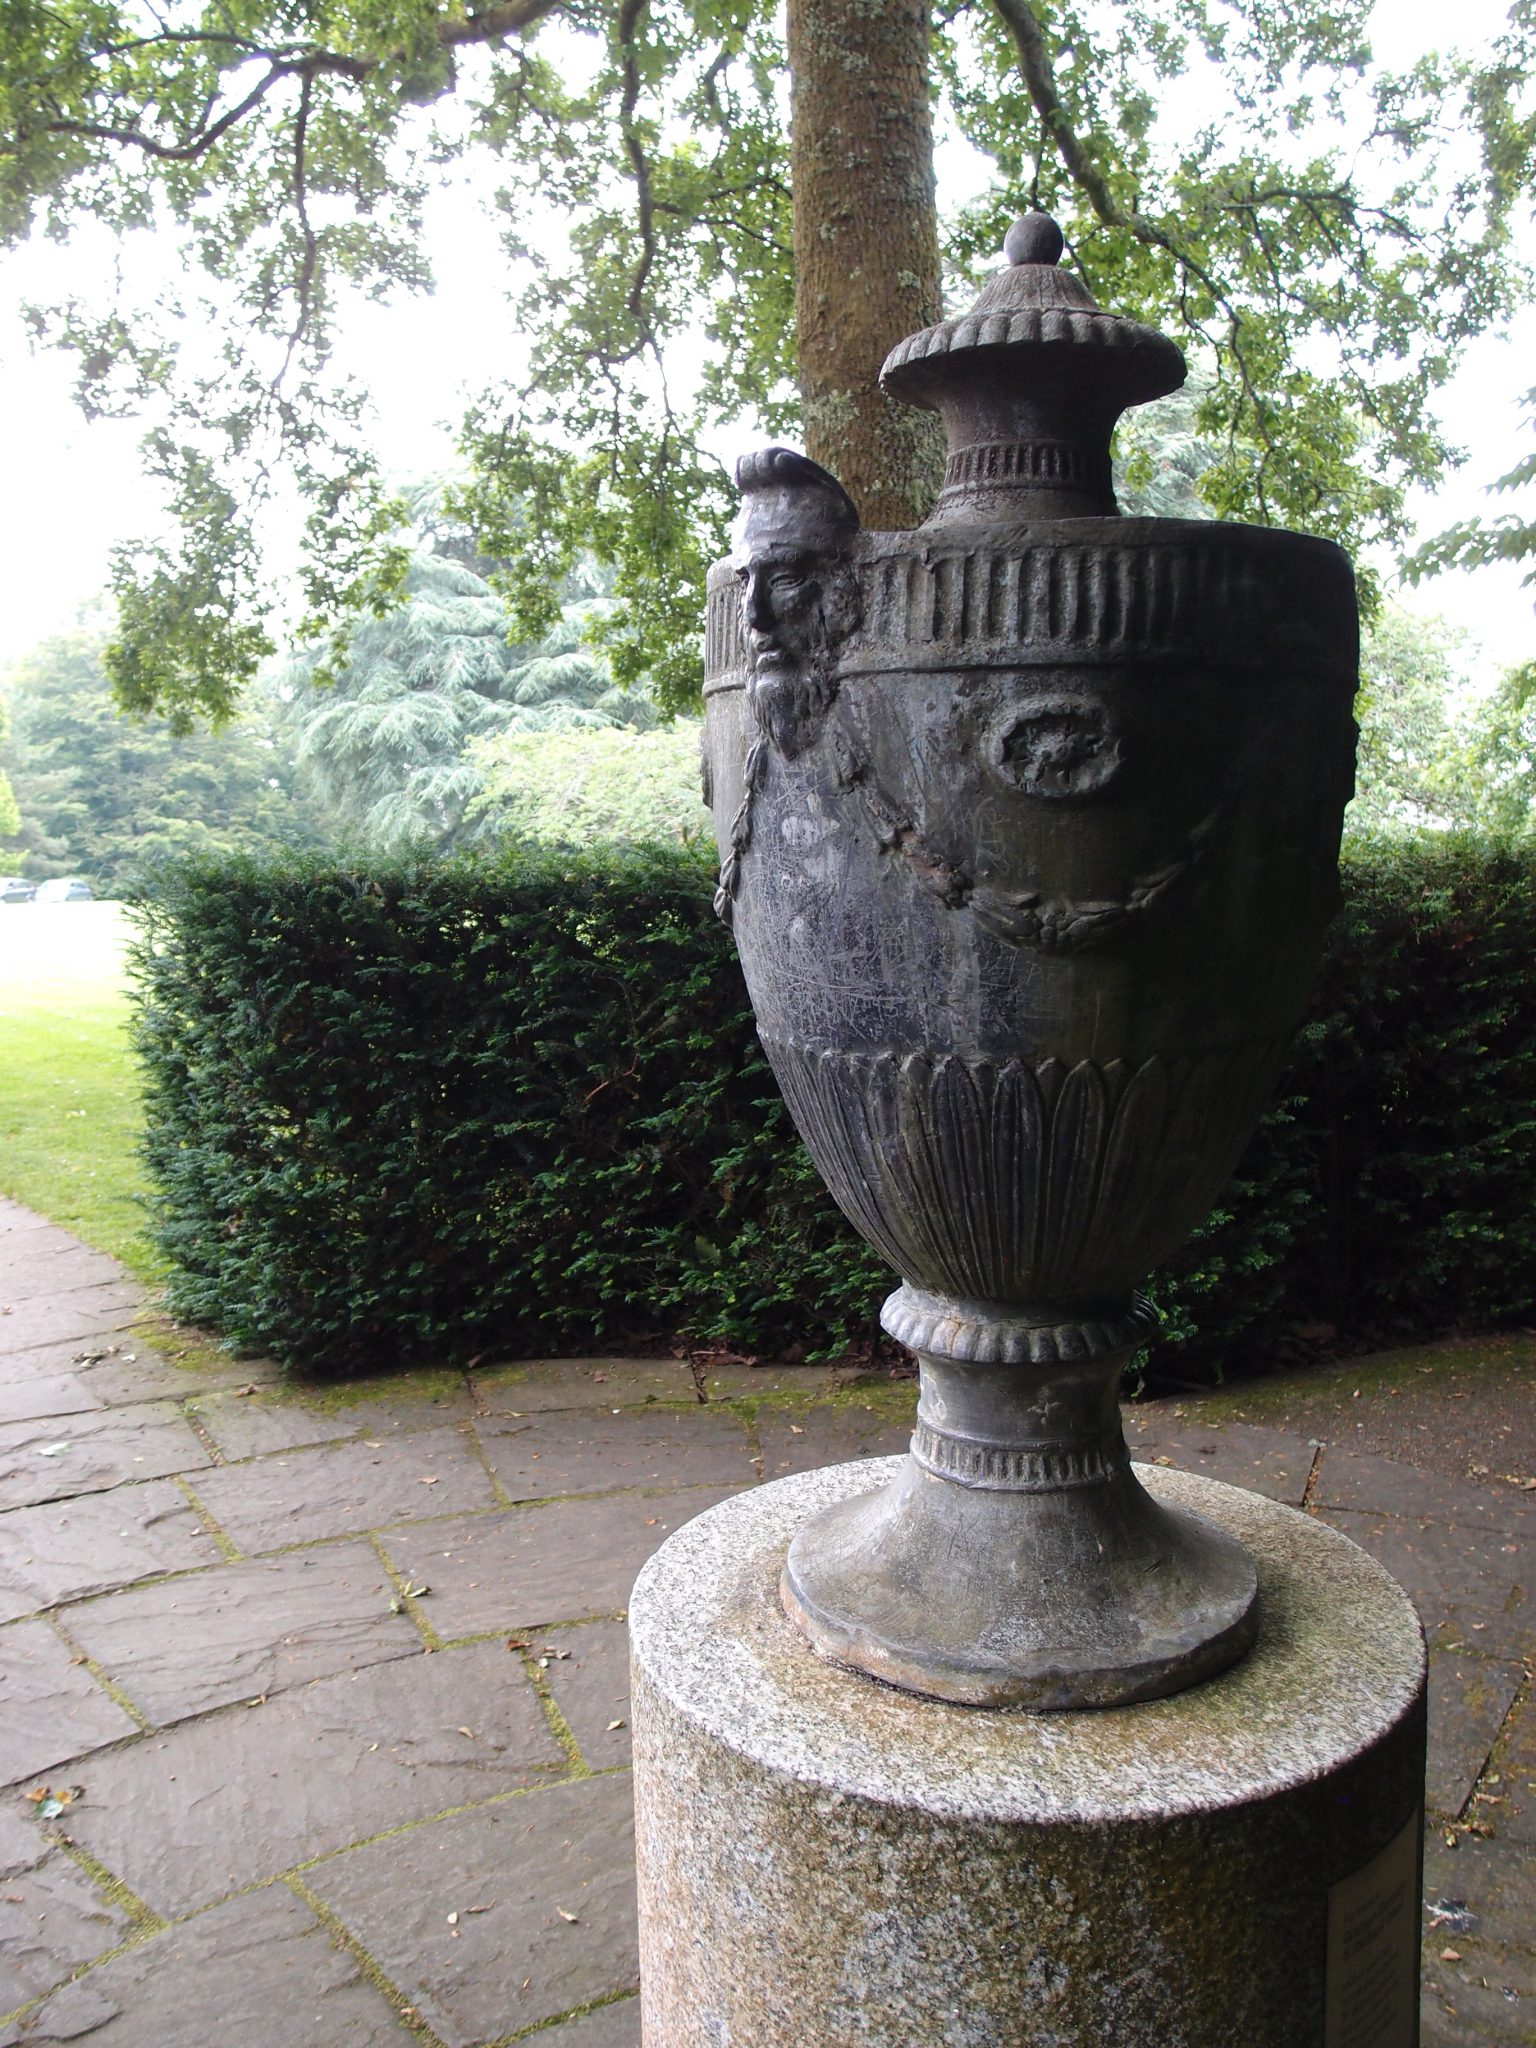 Behind the Great Hall, this George III lead urn marks the beginning of the gardens. The urn is thought to have been chosen by Beatrix Farrand.